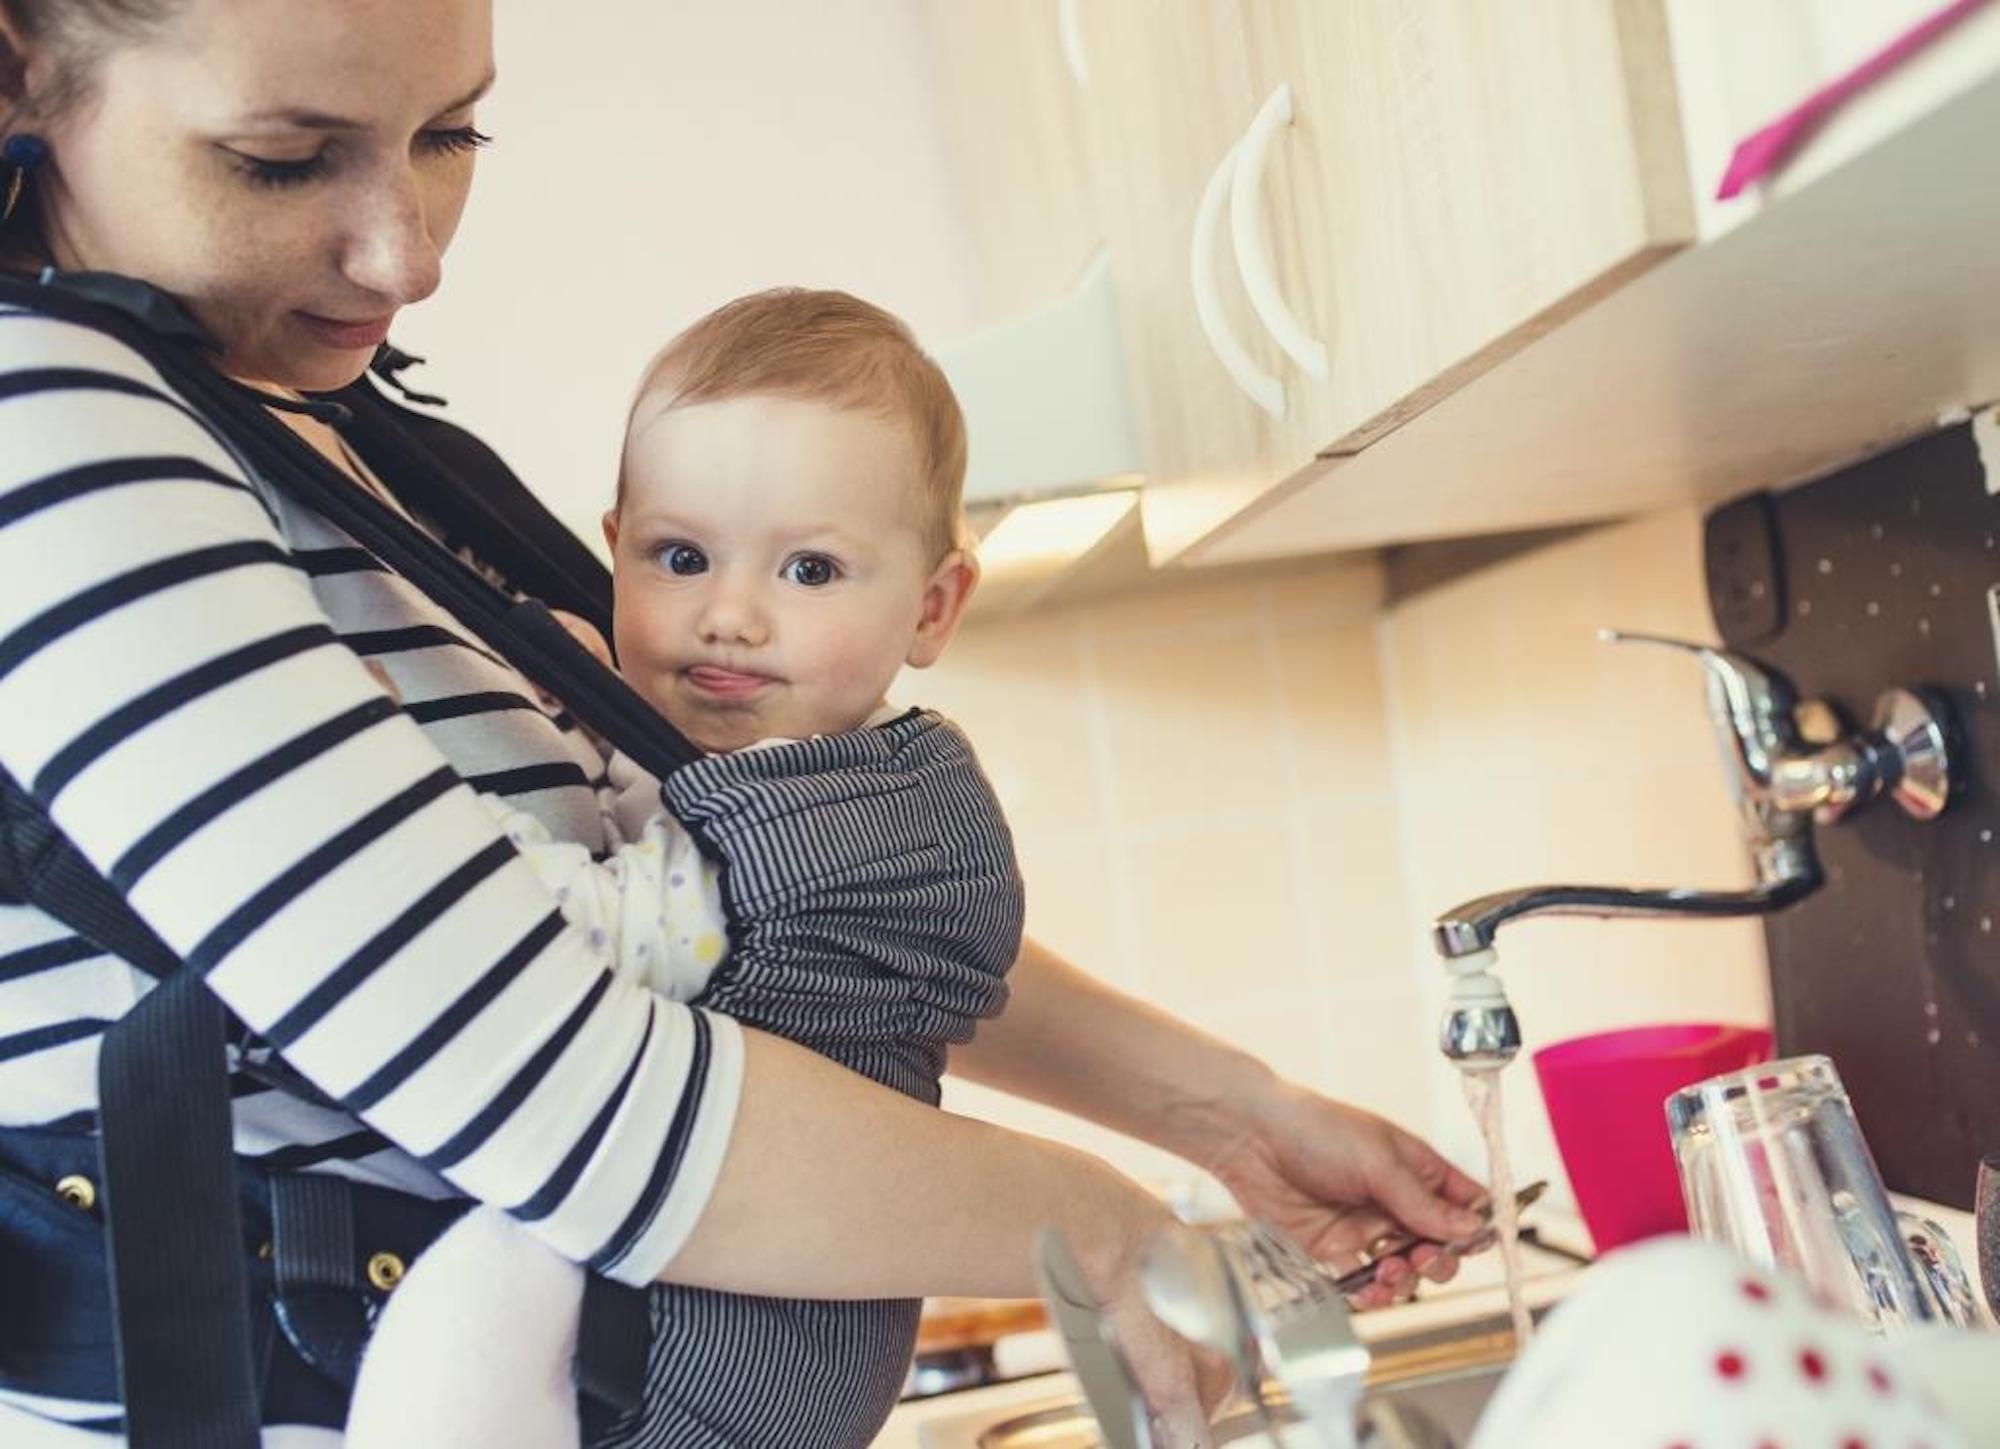 A mother in the kitchen doing the washing up whilst holding her young baby in a sling.